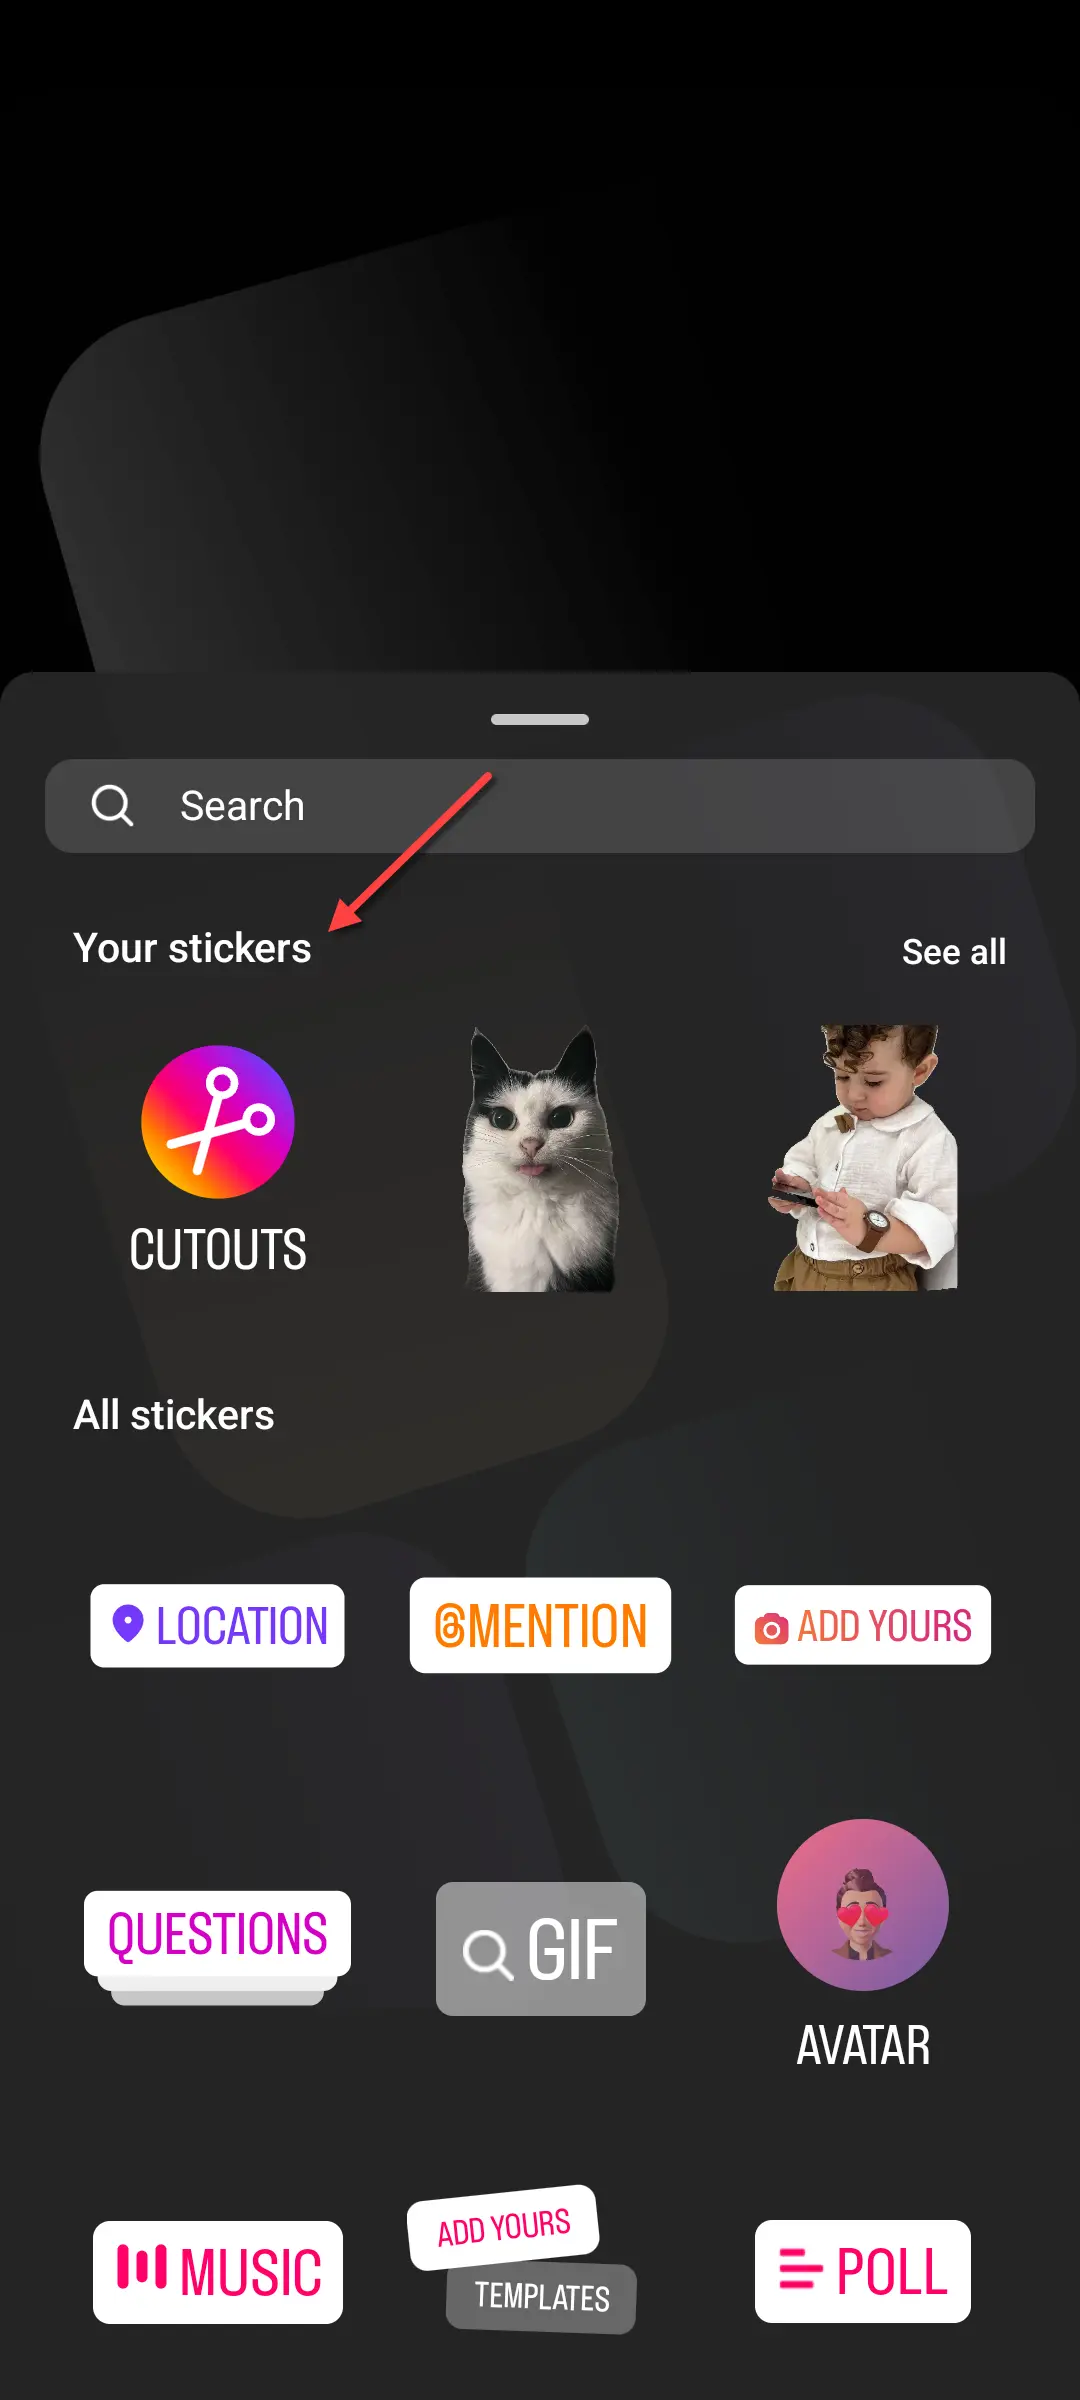 How to Create a Cutout Sticker on Instagram Android App Easily